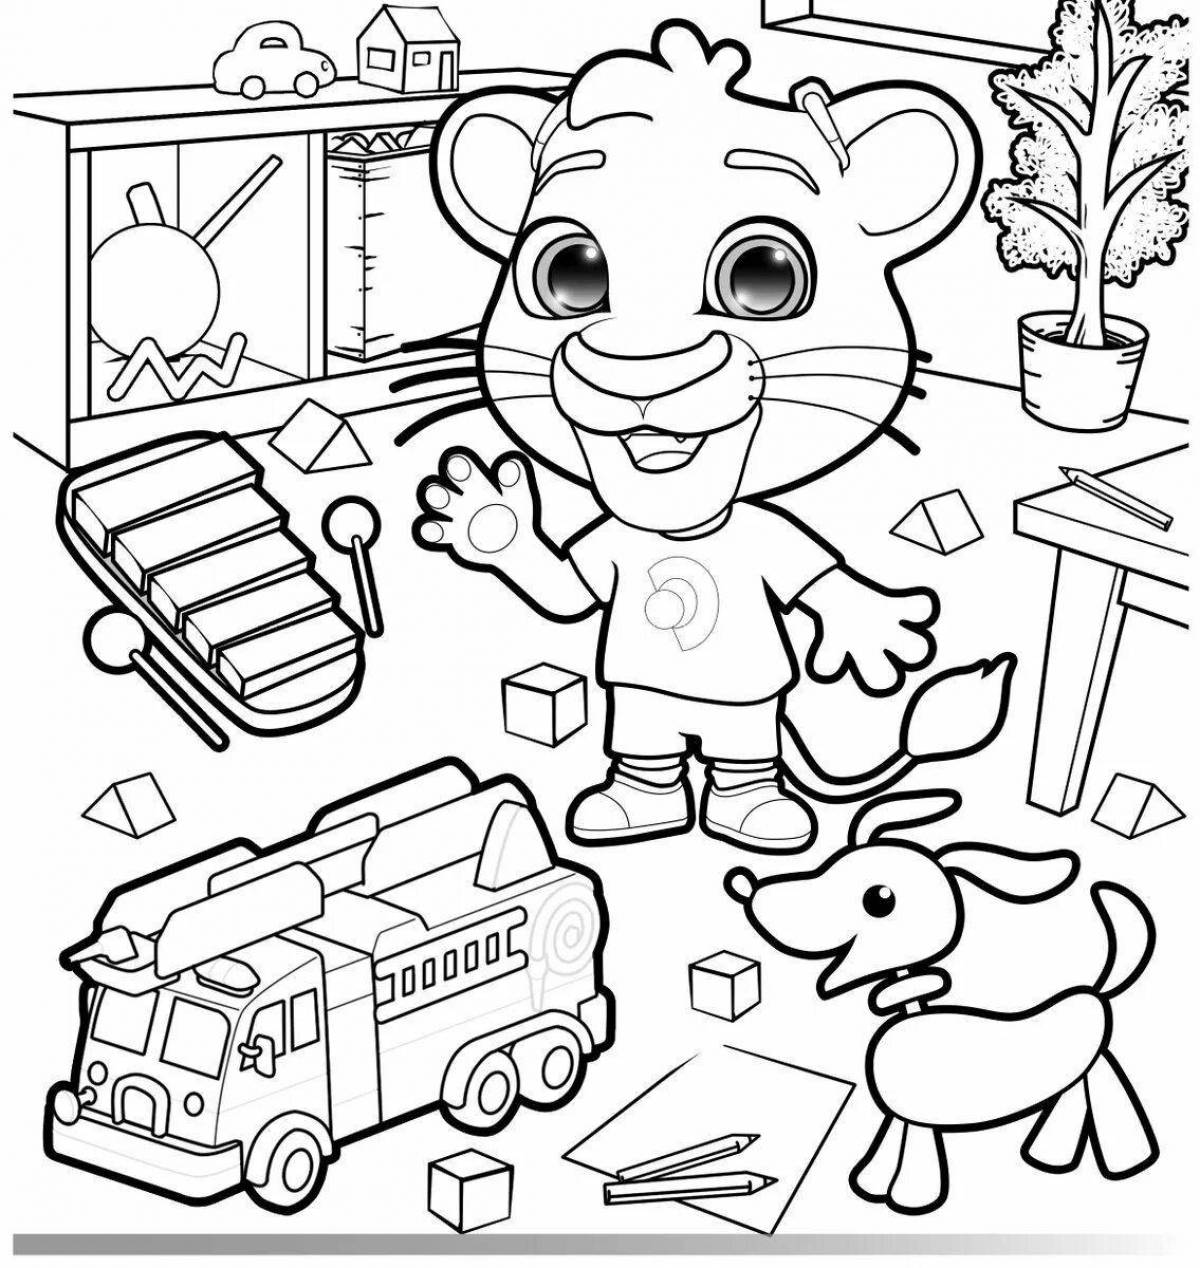 Quivervision bright coloring page